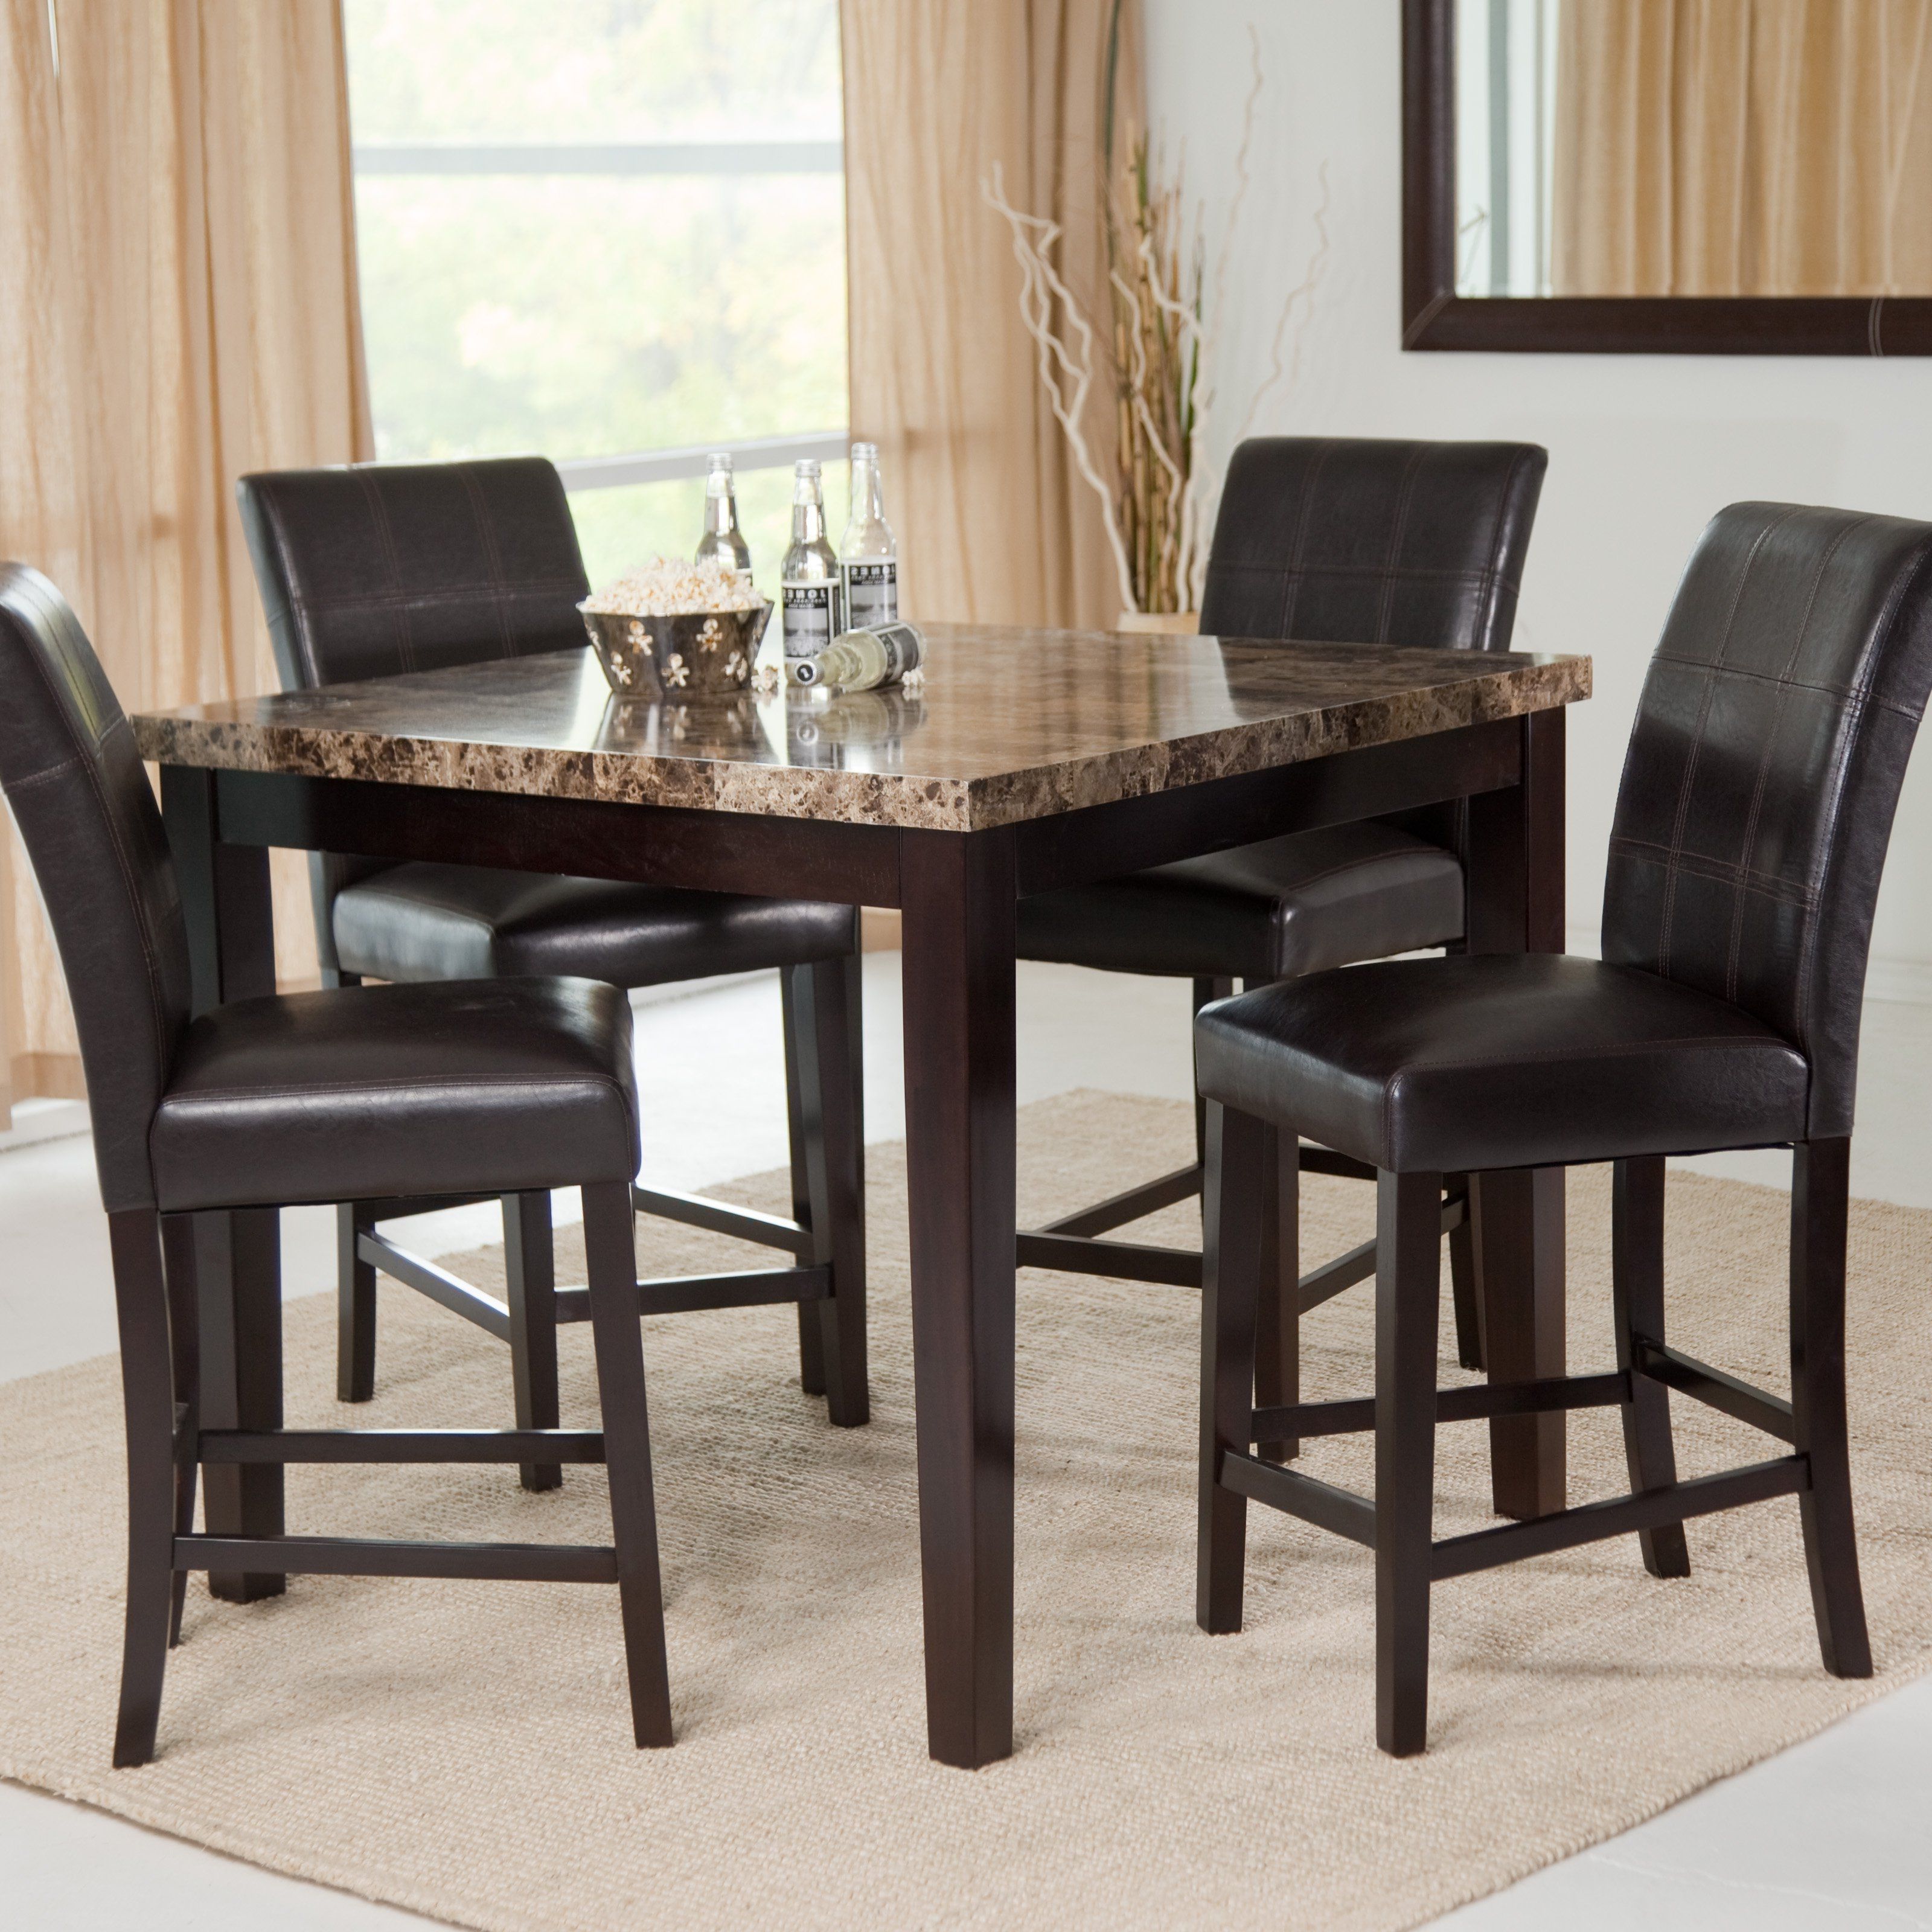 Palazzo 6 Piece Rectangle Dining Sets With Joss Side Chairs For Well Liked Have To Have It. Palazzo 5 Piece Counter Height Dining Set – $ (View 13 of 25)